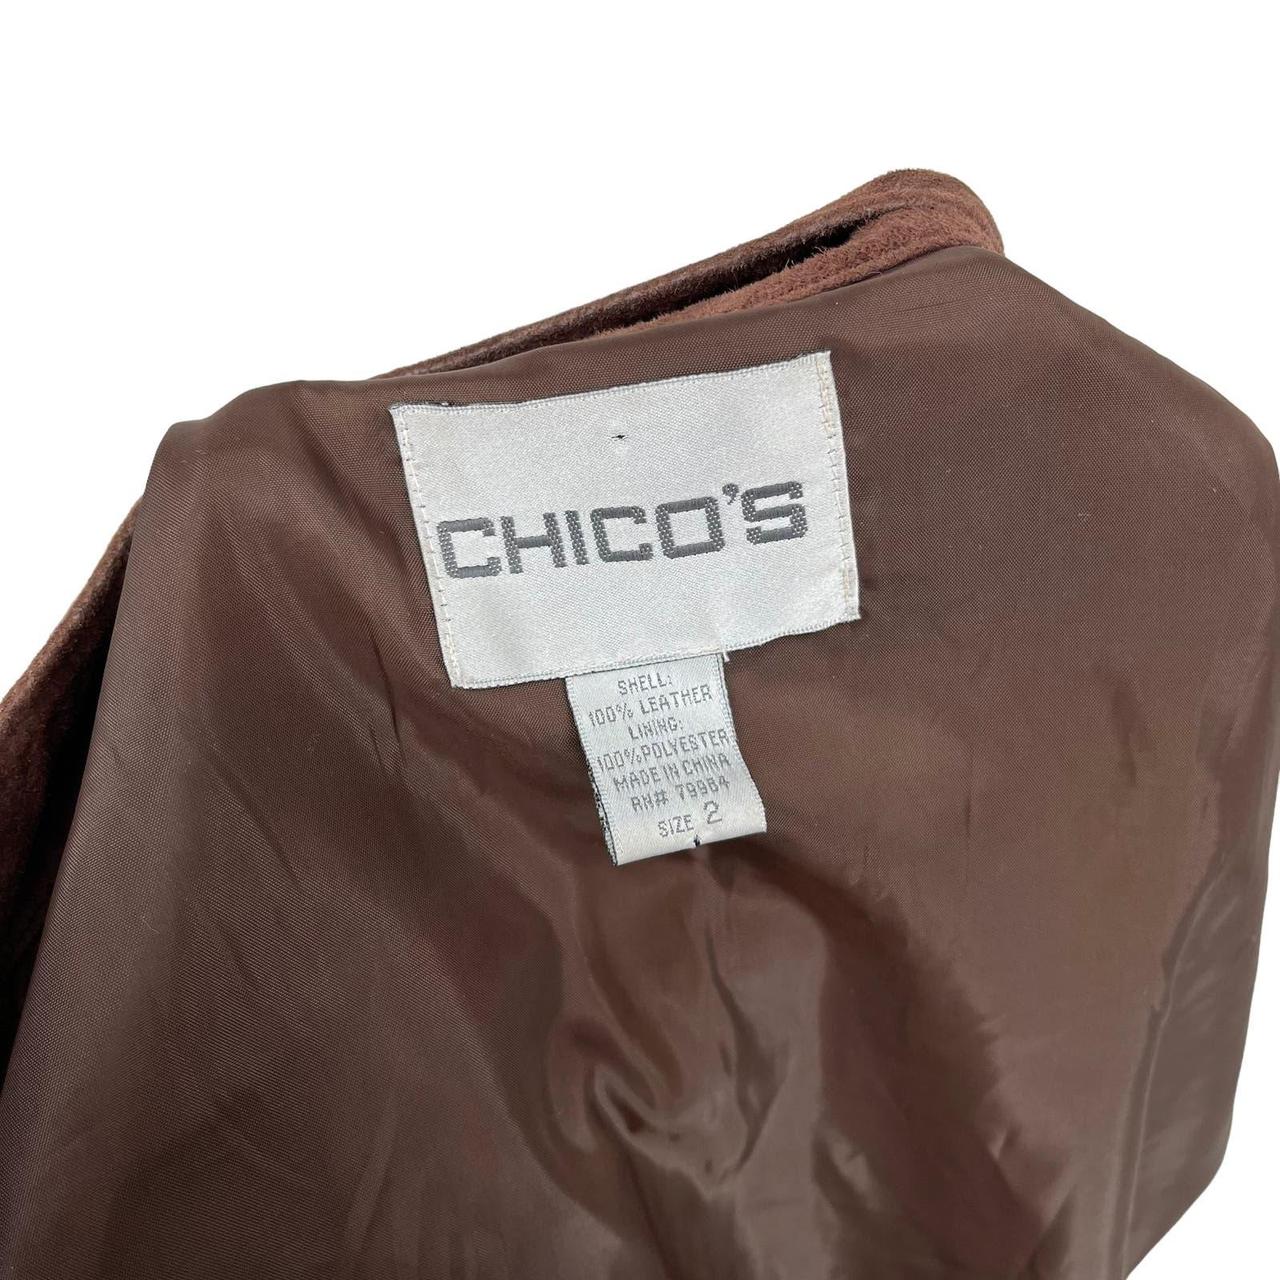 Chico women size 2 color brown and beige RN 79984